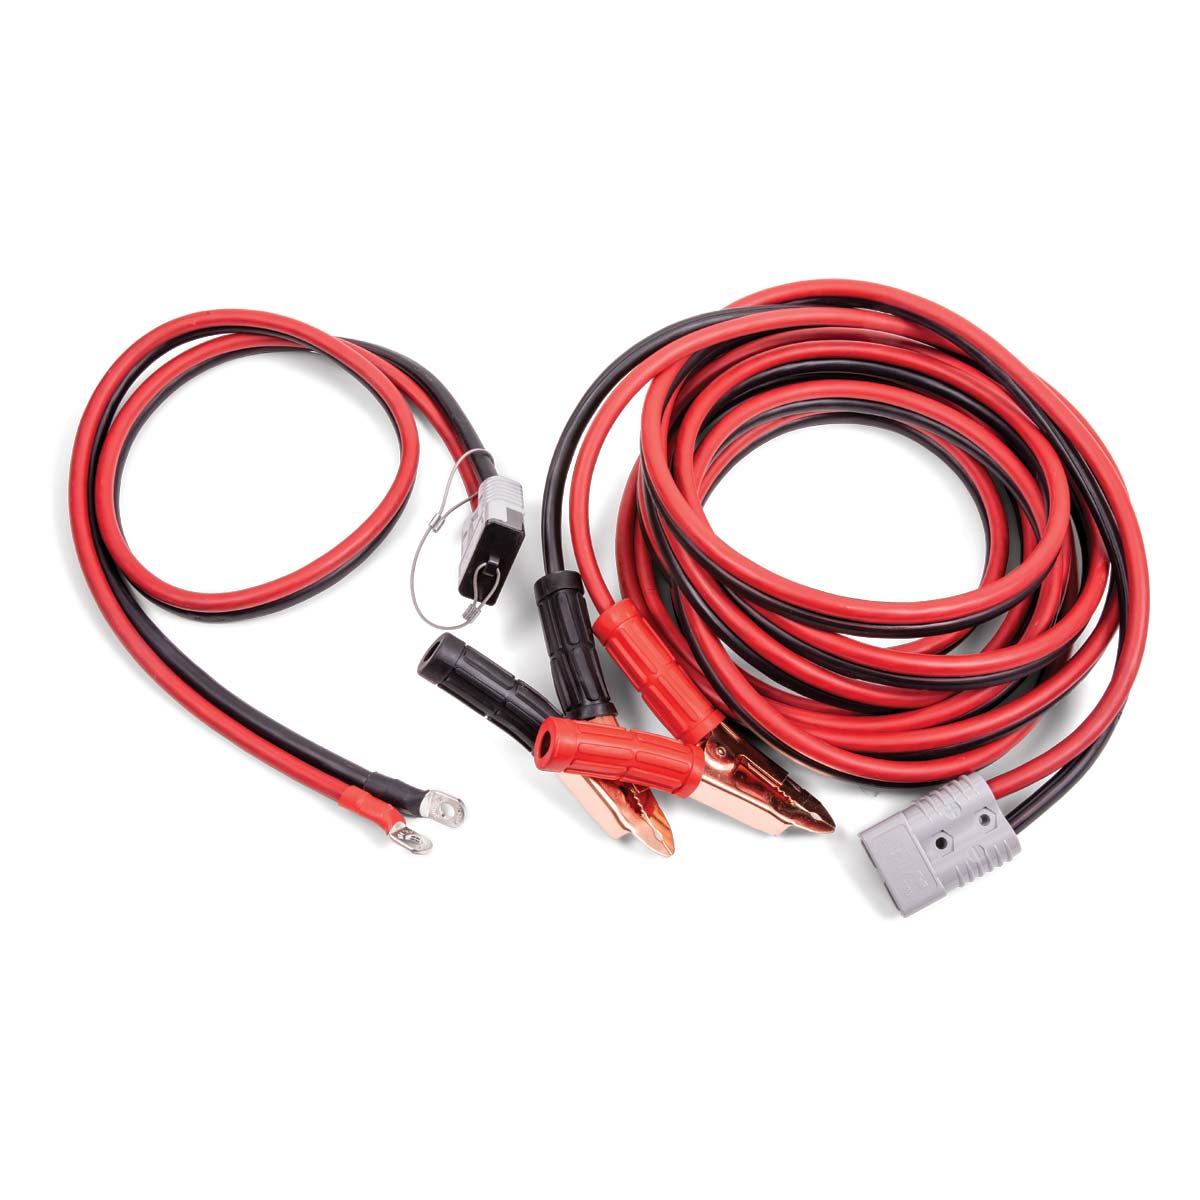 Booster Cables with Quick Connect